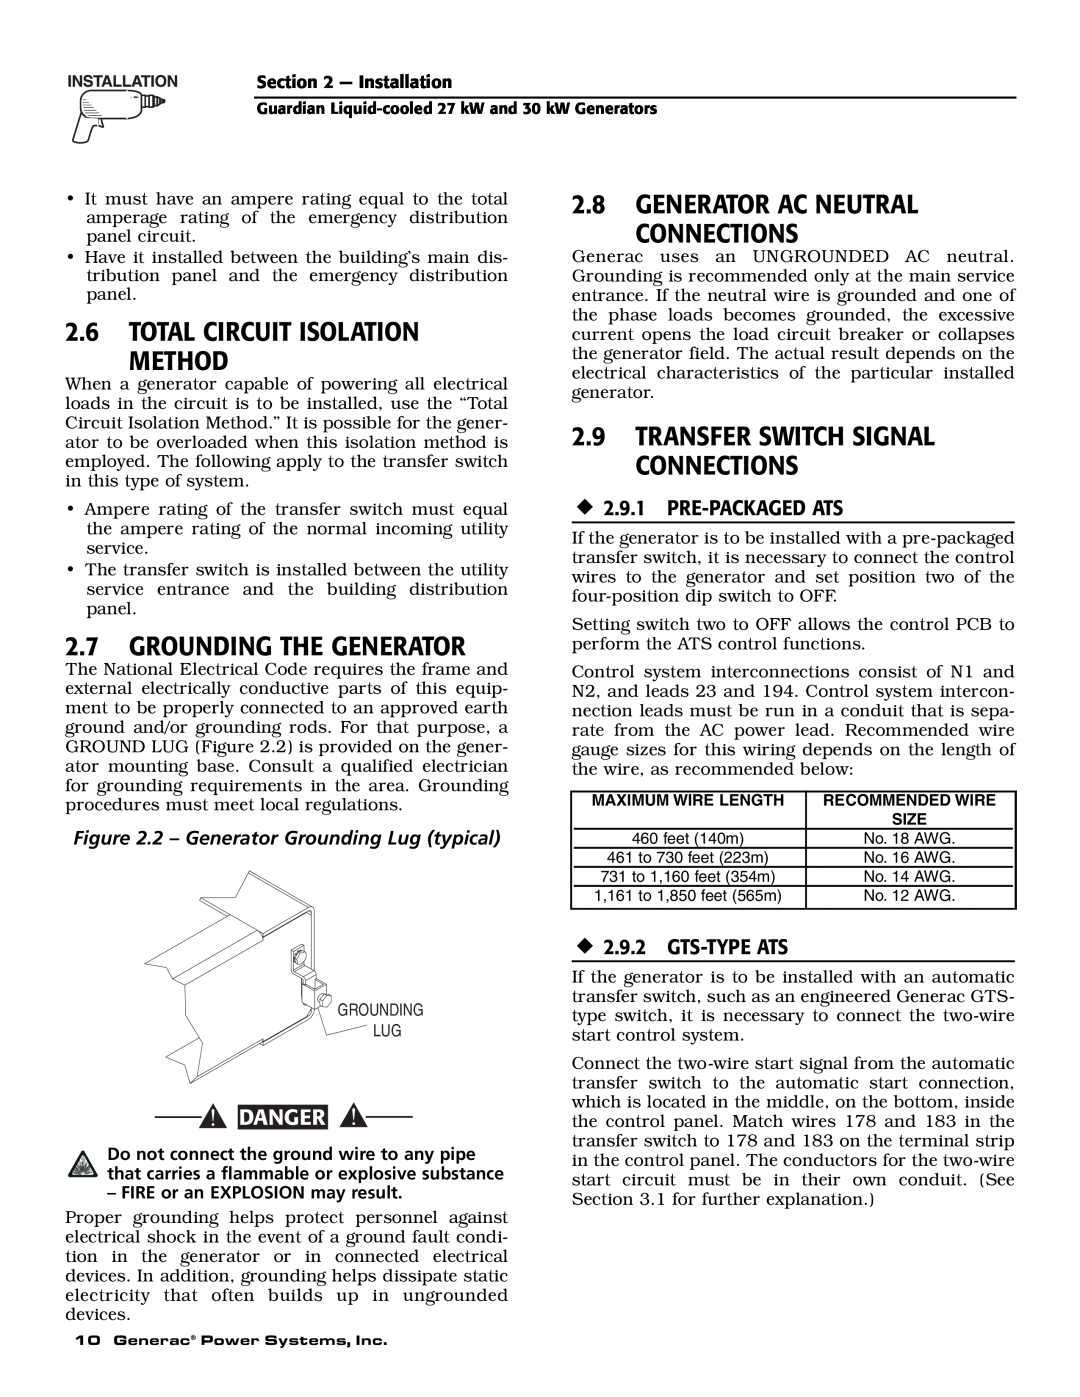 Generac Power Systems 004988-1 2.6TOTAL CIRCUIT ISOLATION METHOD, 2.7GROUNDING THE GENERATOR, ‹2.9.1 PRE-PACKAGEDATS 